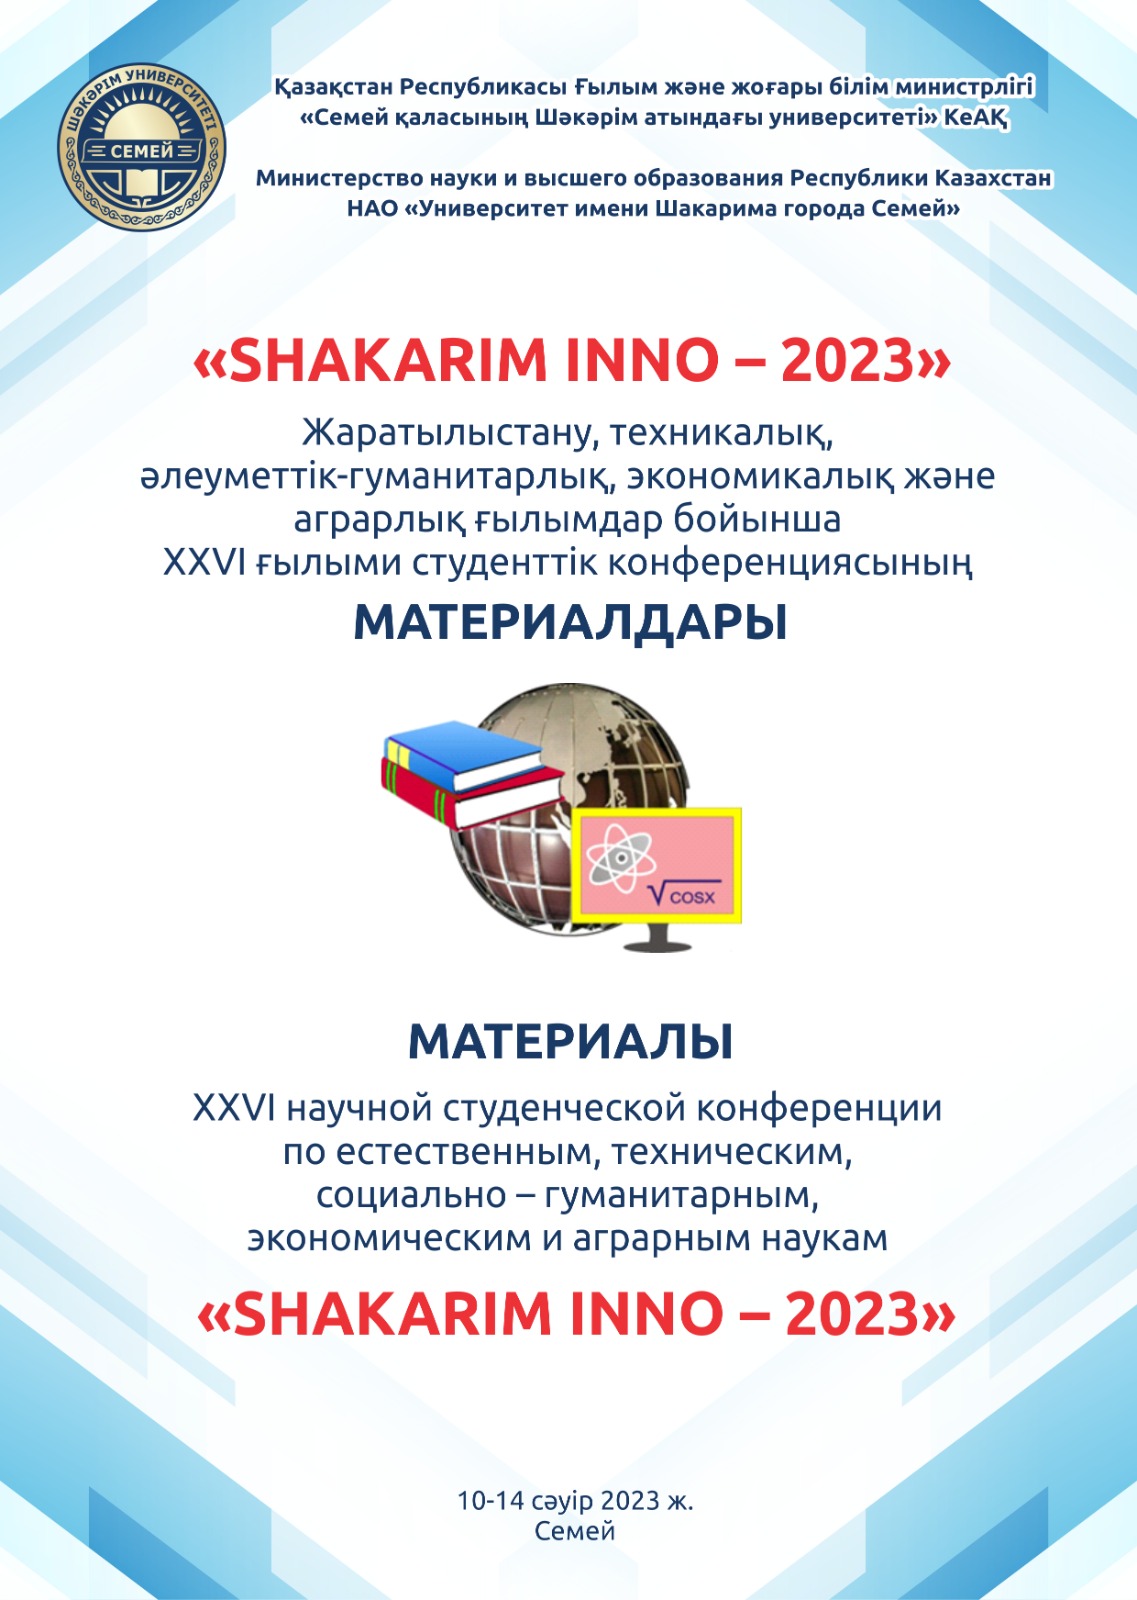 Collection of materials of the XXVI scientific student conference on natural, technical, socio-humanitarian, economic and agricultural sciences «SHAKARIM INNO – 2023»